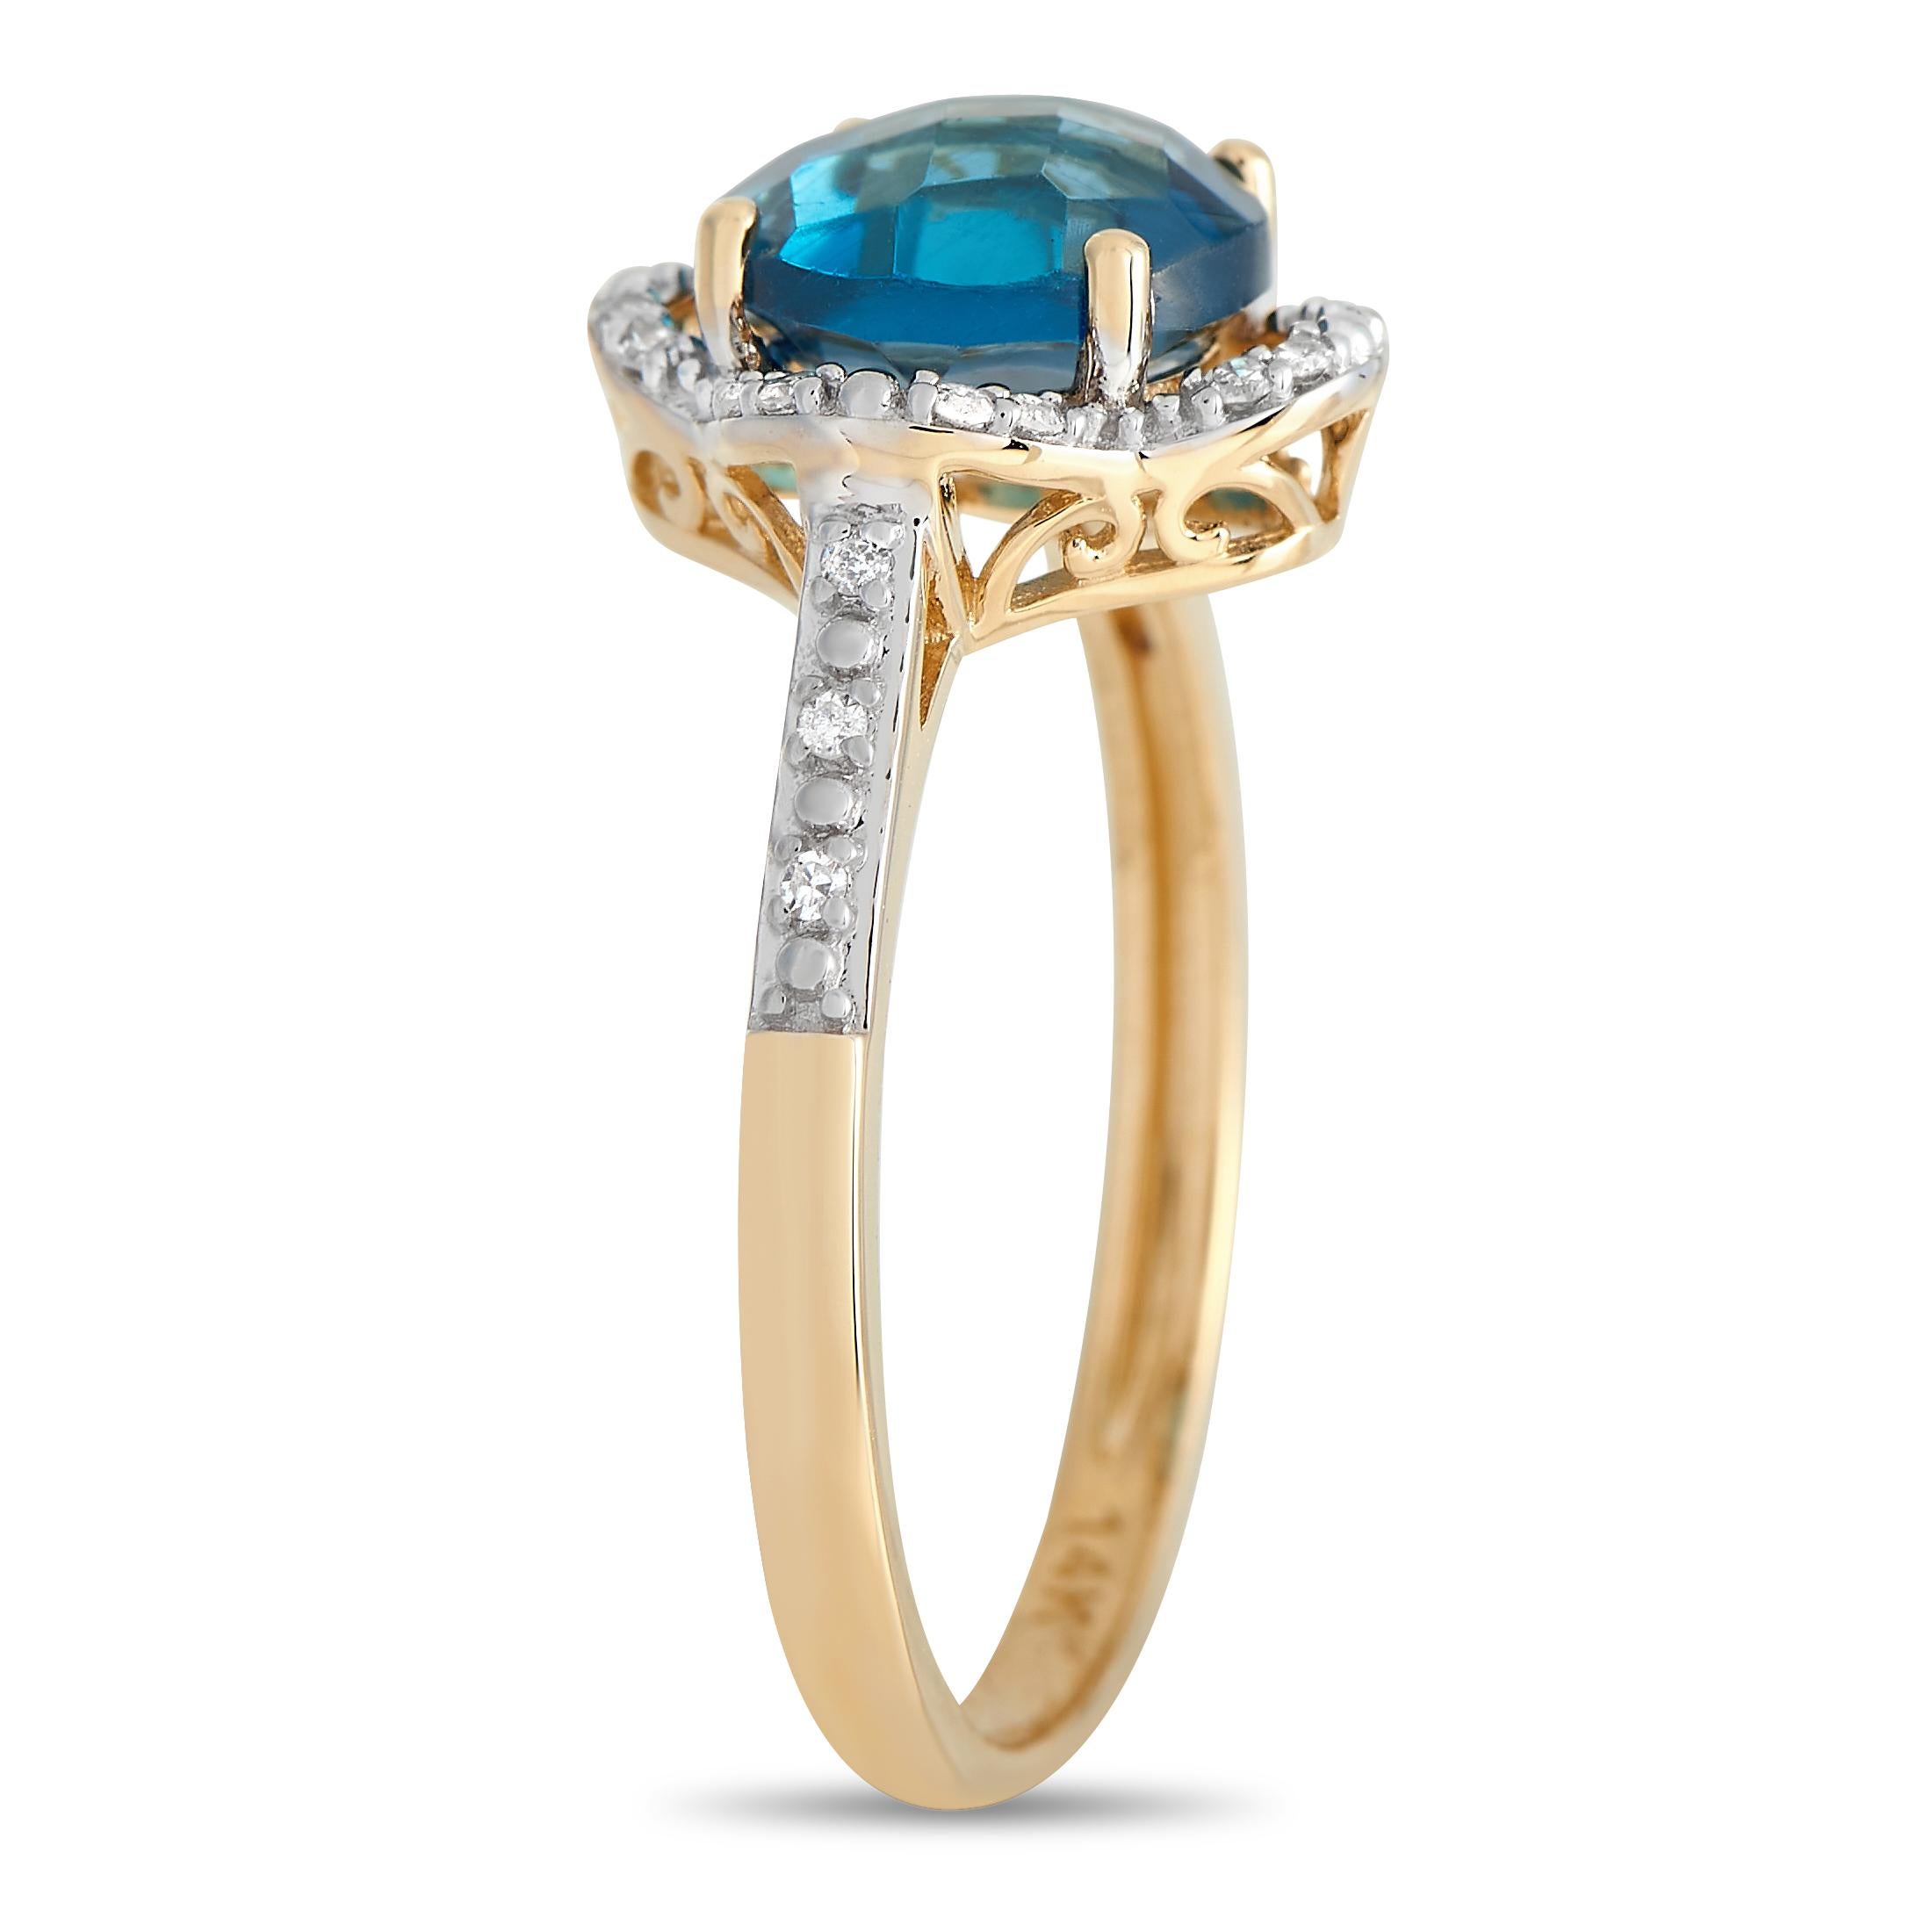 Wear this ring to add an instant positivity and color boost to your look. The ring has a slender band in 14K yellow gold, with rising shoulders decorated with diamonds. The centerpiece is a round topaz secured by four prongs and mounted on a